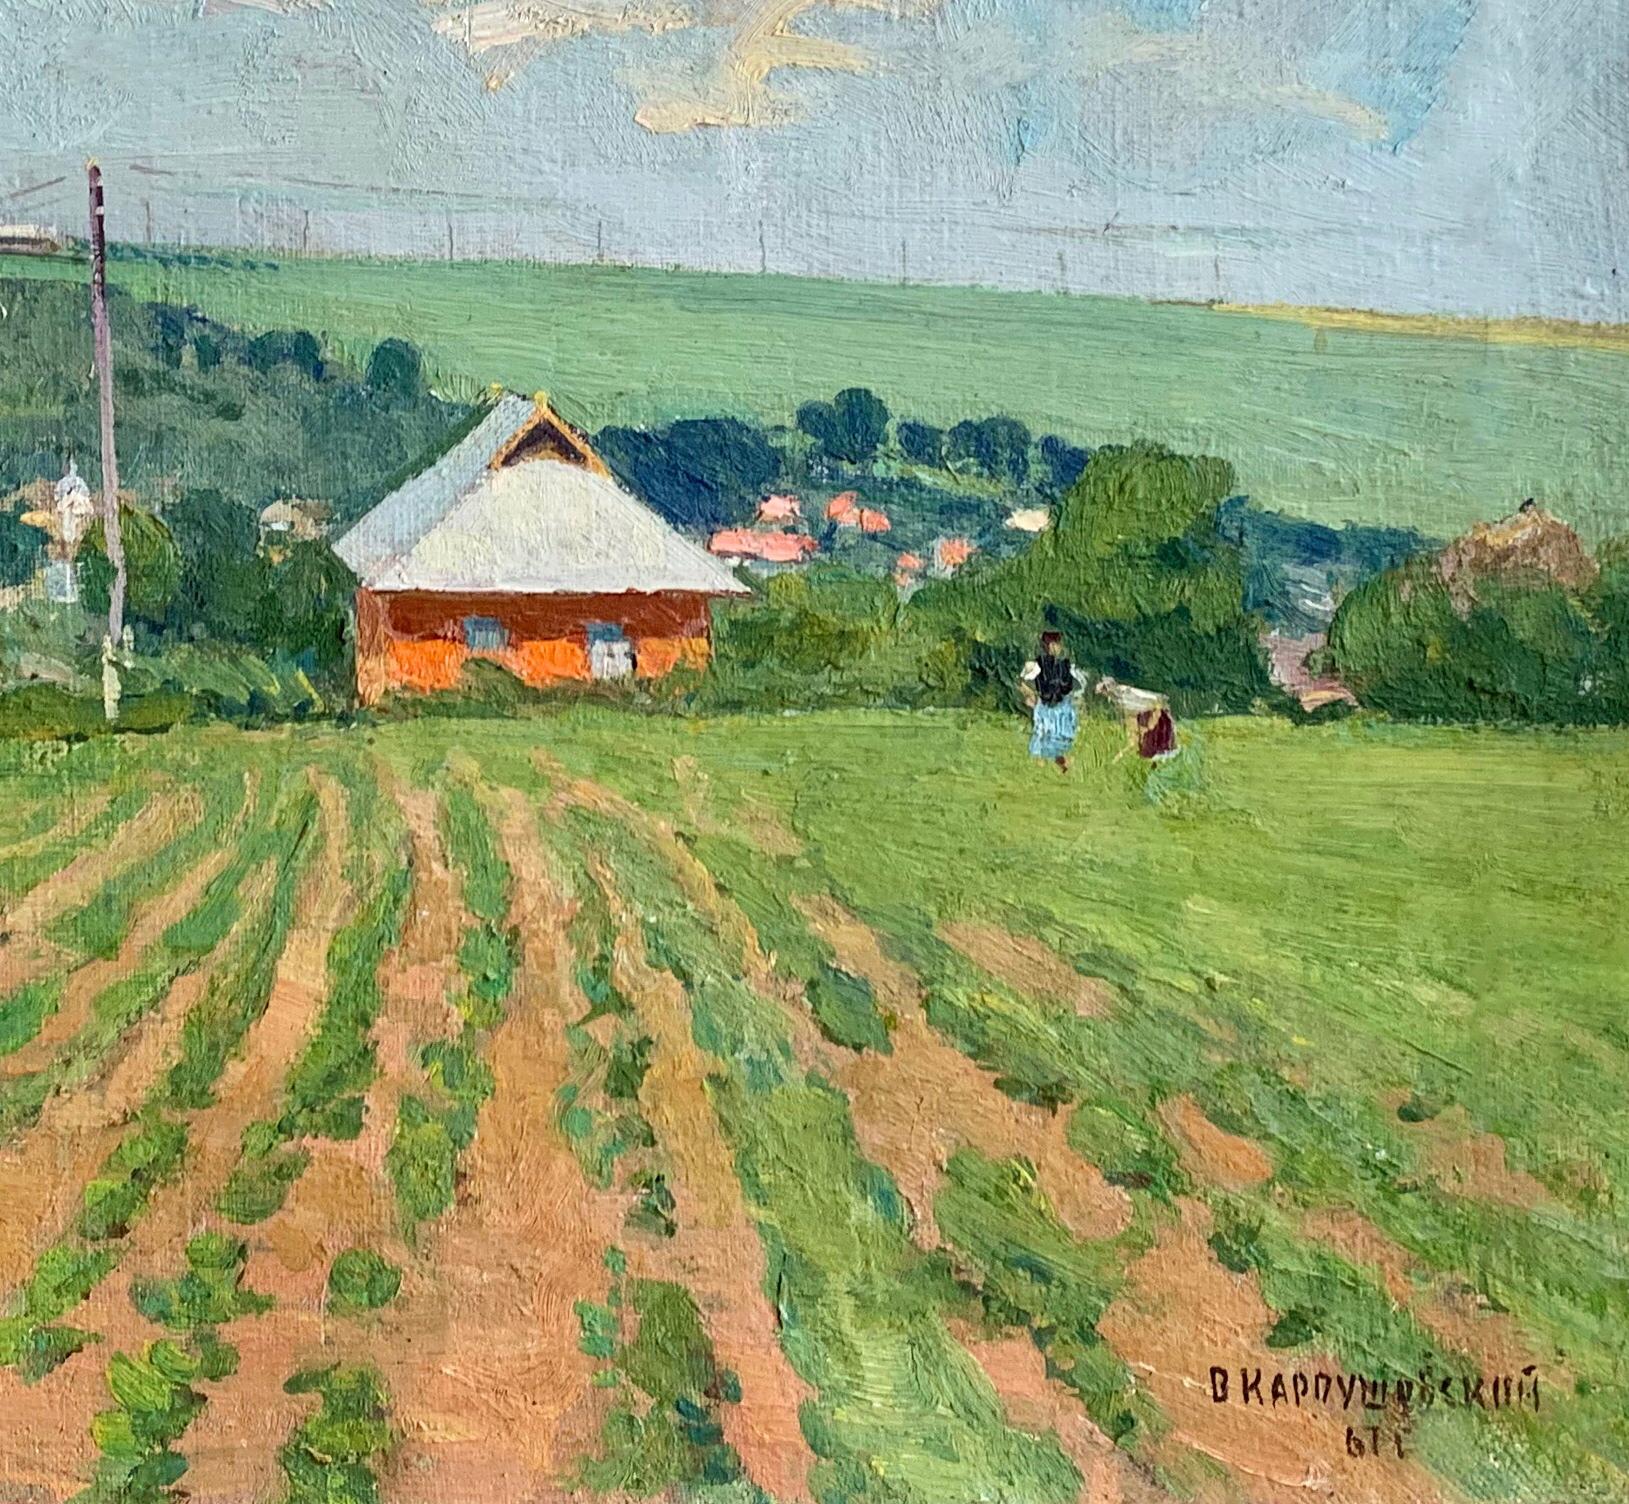 Vintage Landscape Painting Oil Canvas Original Art Spring Field by Karpushevsky V.
This is an original artwork by a well known Soviet Ukrainian artist Karpushevsky Vasily (1917-1990). This work was painted in 1967 and was signed on the front